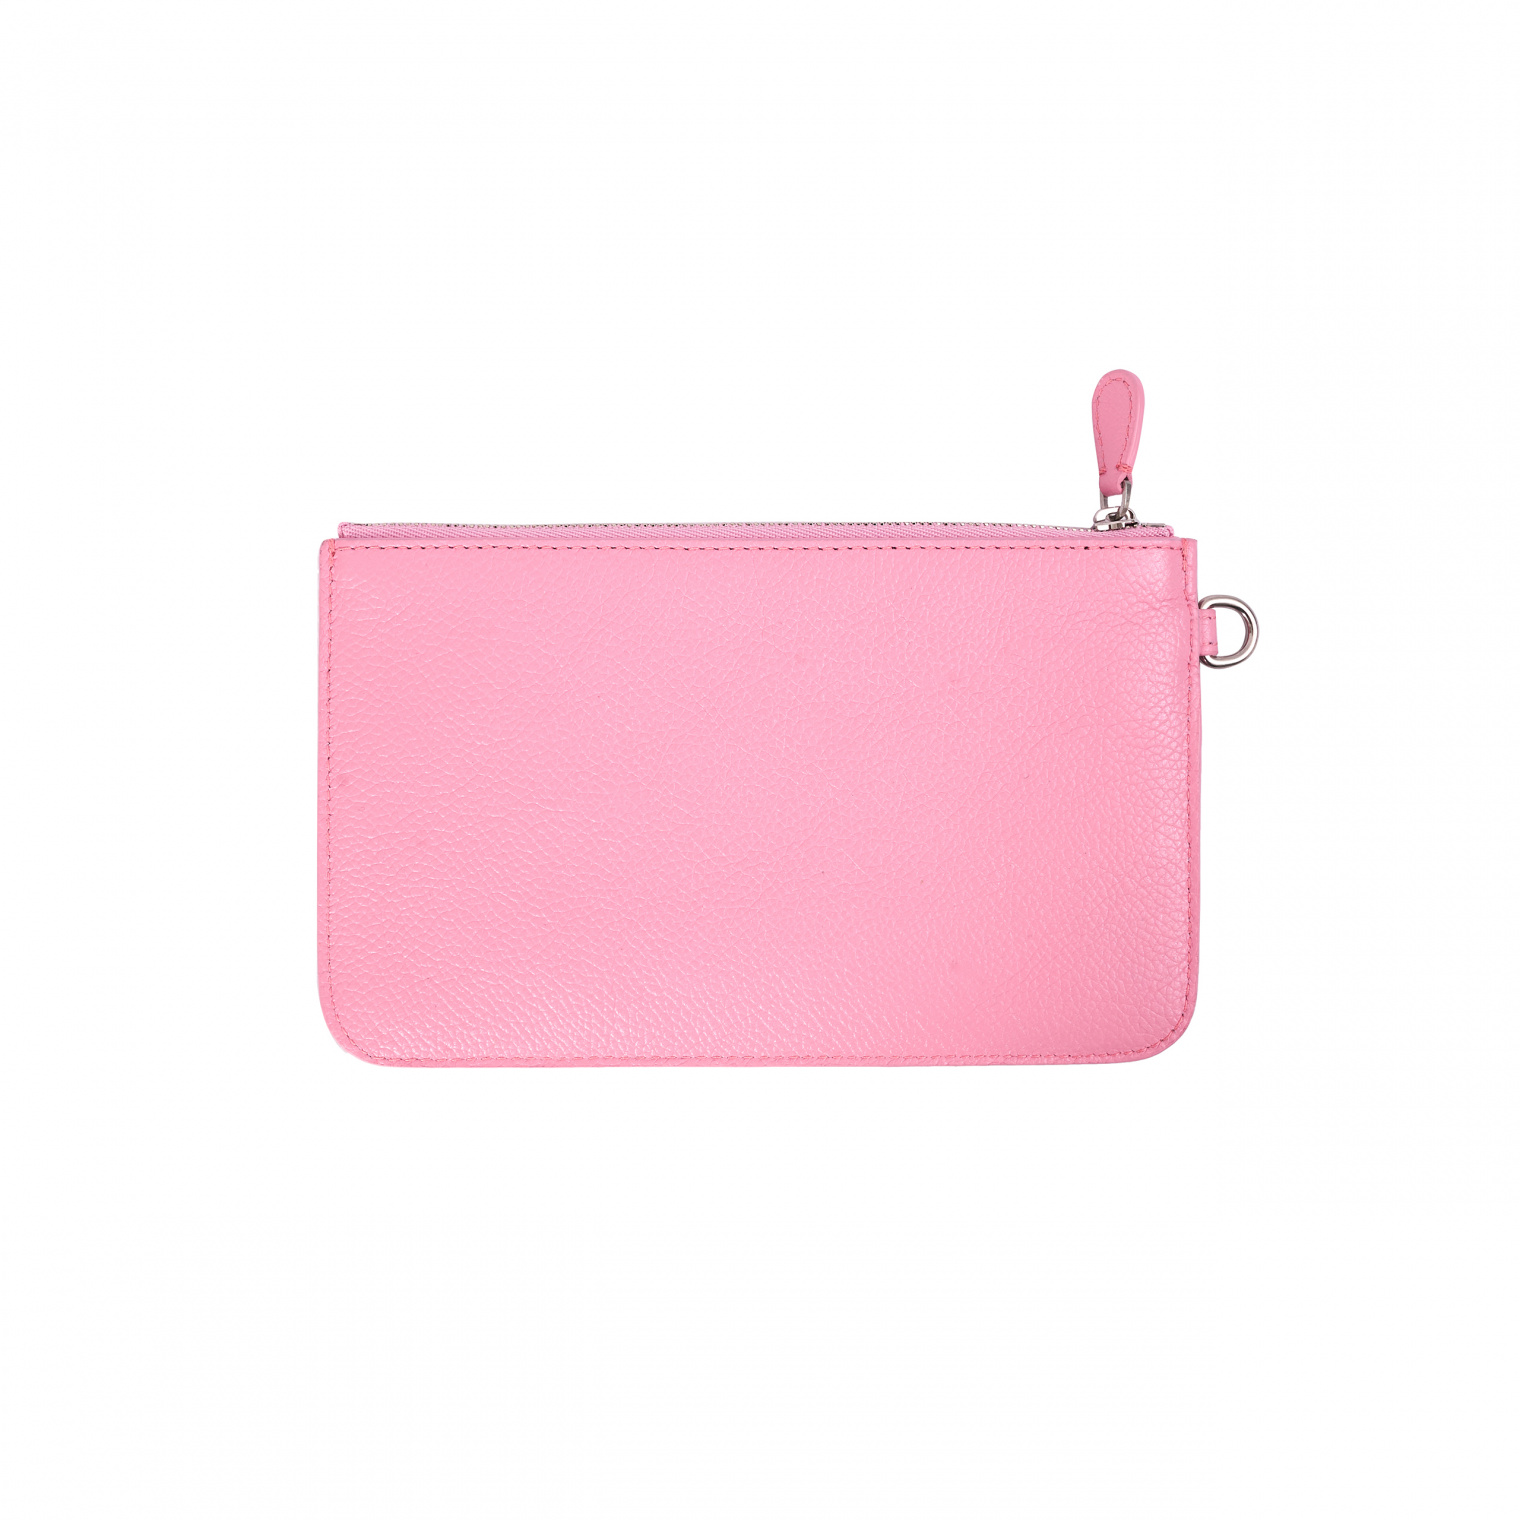 Balenciaga Cash Wallet in Pink Grained Leather